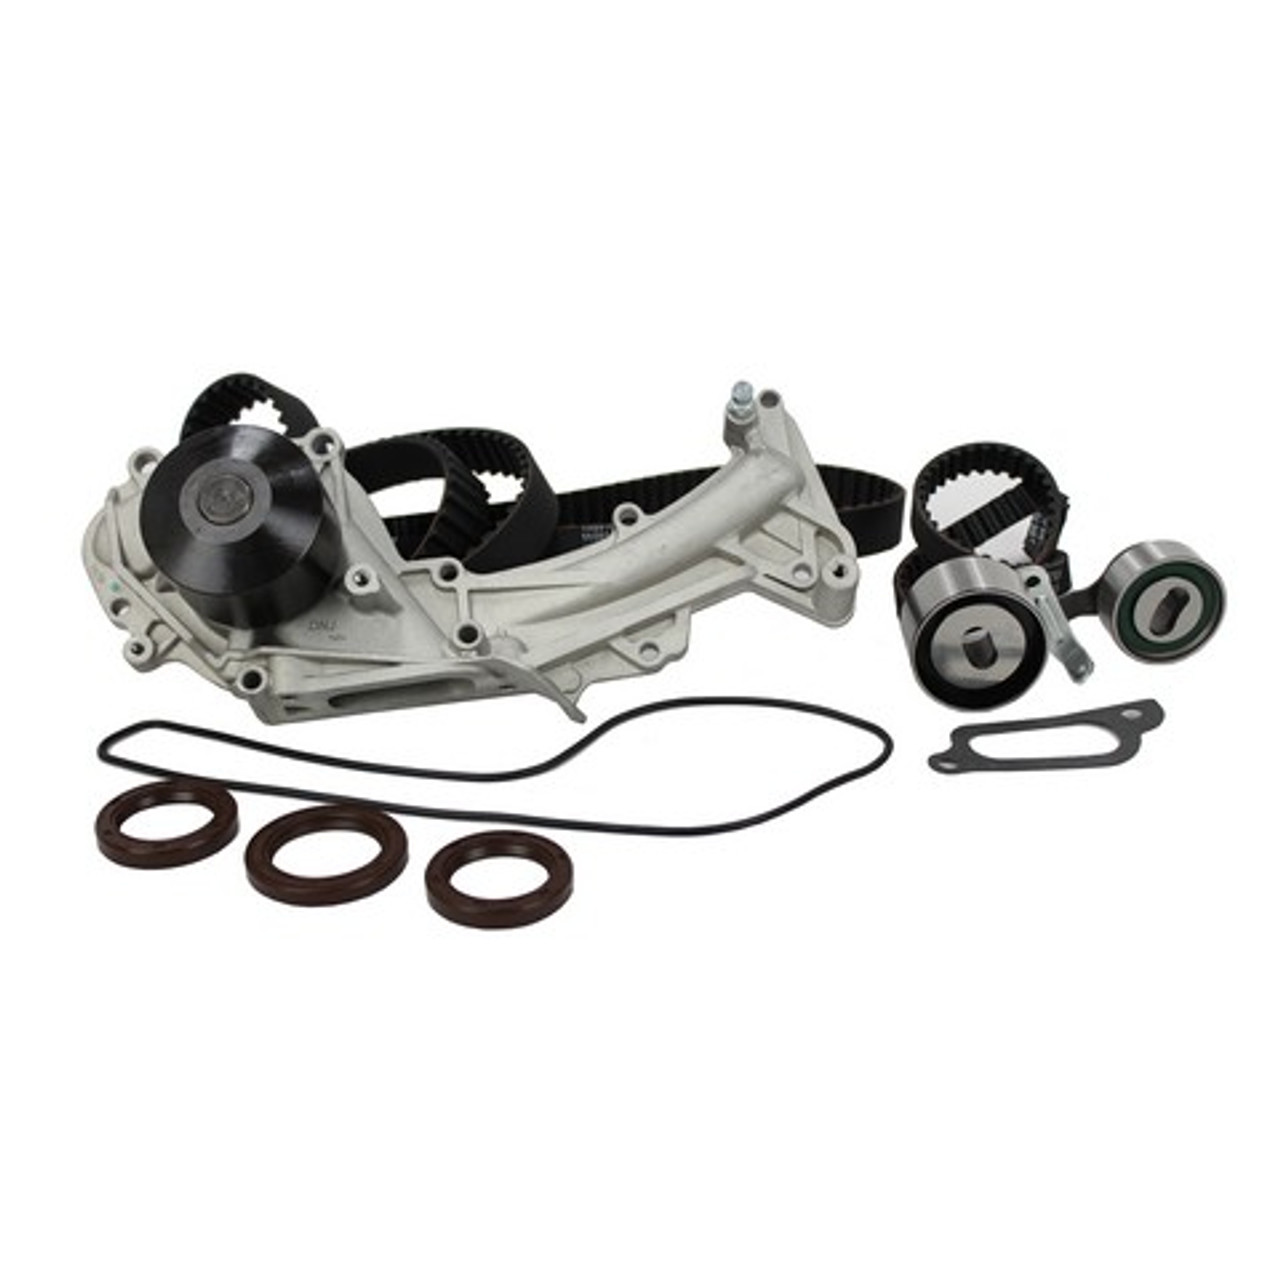 Timing Belt Kit with Water Pump 3.5L 2000 Acura RL - TBK283WP.5